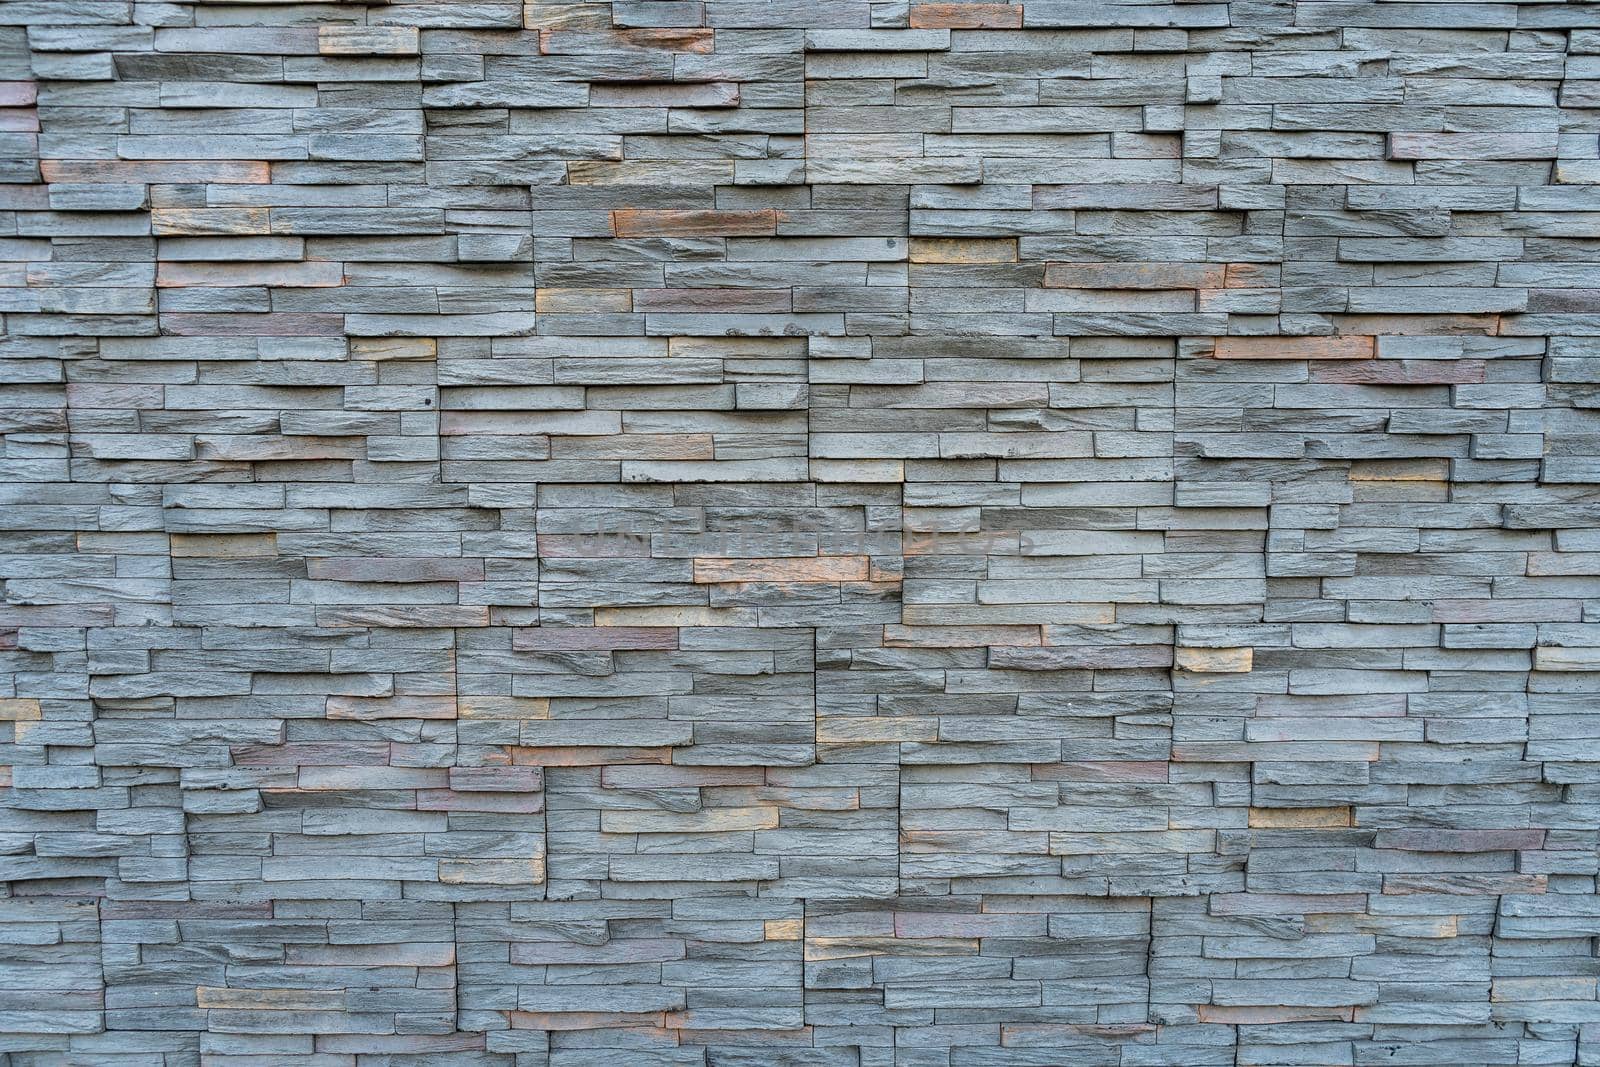 Background arrangement of stones or slabs of different shapes and colors on a wall. by hdcaputo